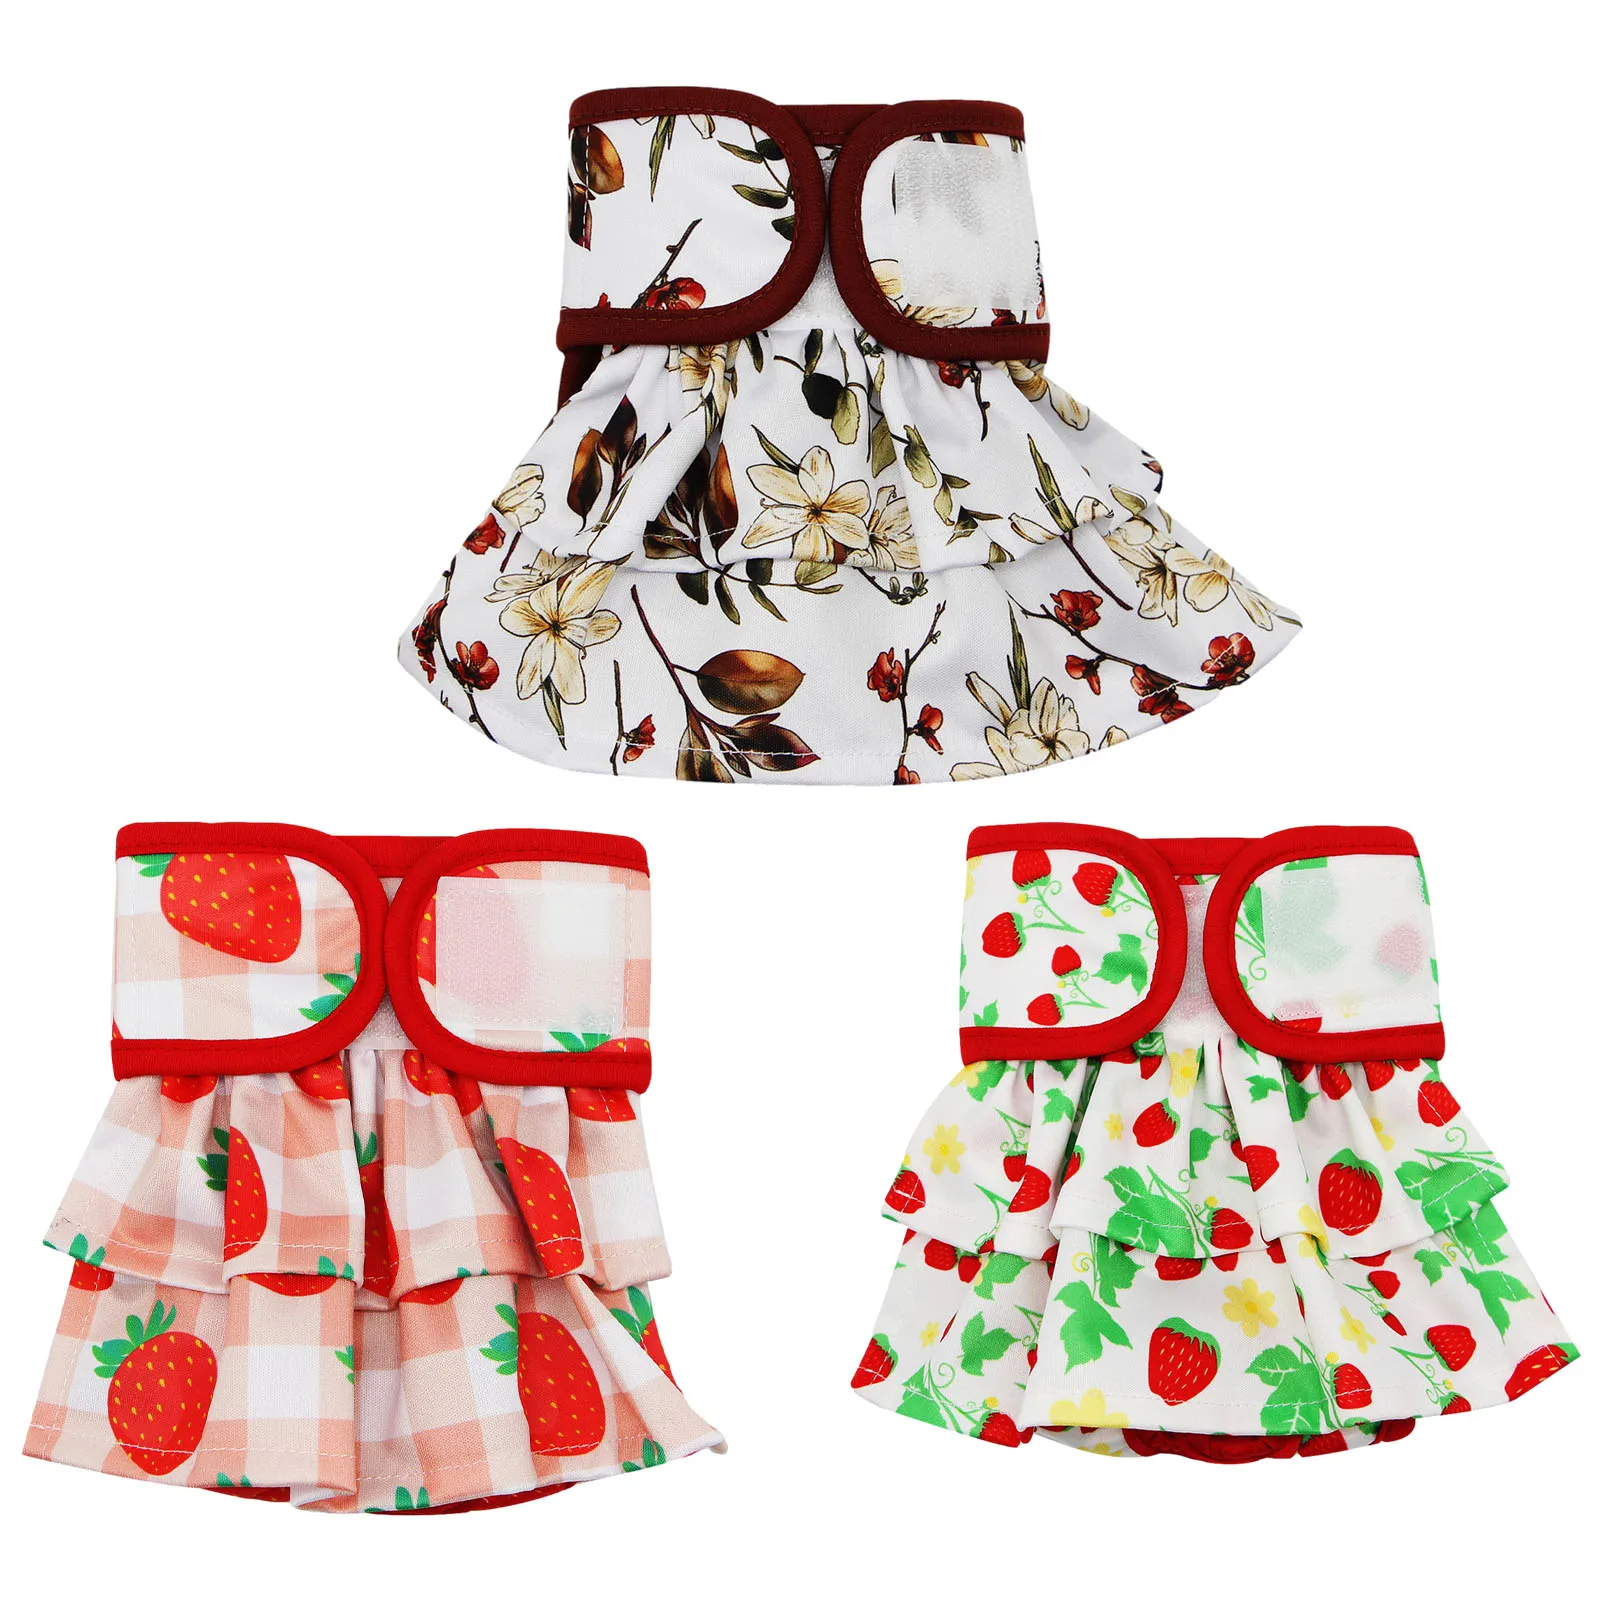 

Adorable Female Pet Dog Puppy Diaper Skirt Physiological Sanitary Short Panty Nappy Underwear XS/S/M/L